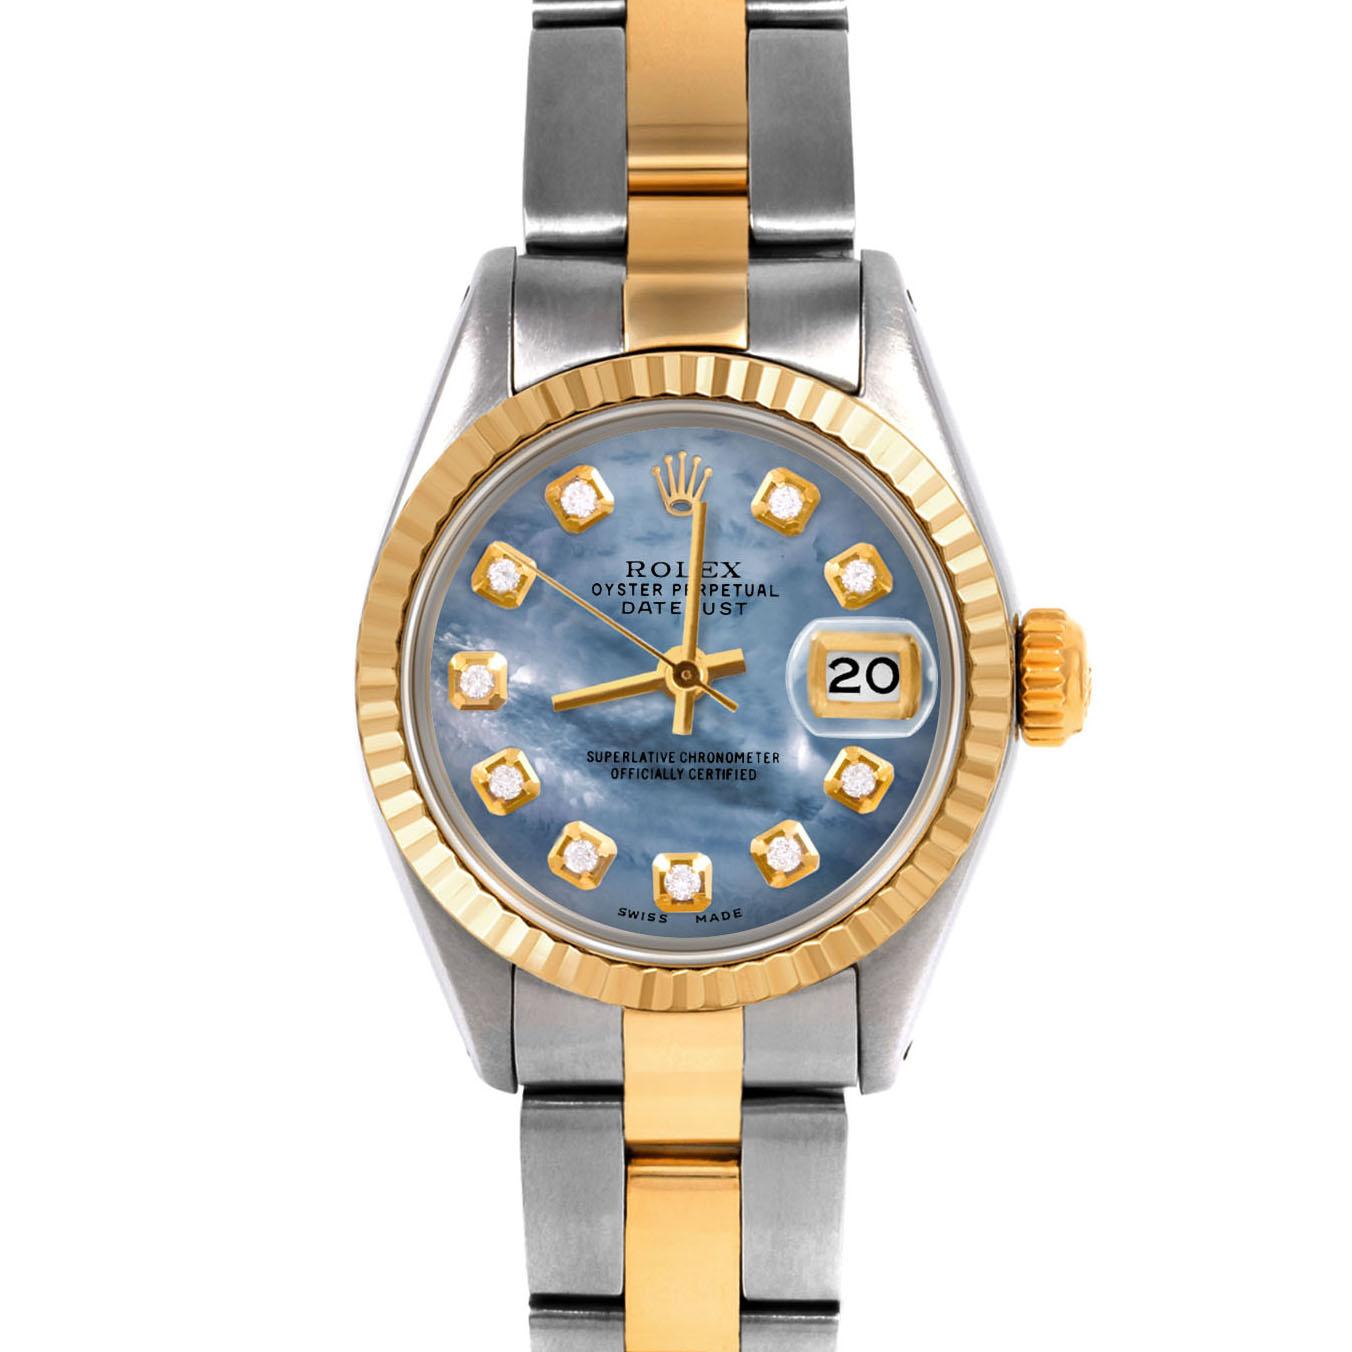 Swiss Wrist - SKU 6917-TT-BLMOP-DIA-AM-FLT-OYS

Brand : Rolex
Model : Datejust (Non-Quickset Model)
Gender : Ladies
Metals : 14K/Stainless Steel
Case Size : 26 mm

Dial : Custom Blue Mother Of Pearl Diamond Dial (This dial is not original Rolex And